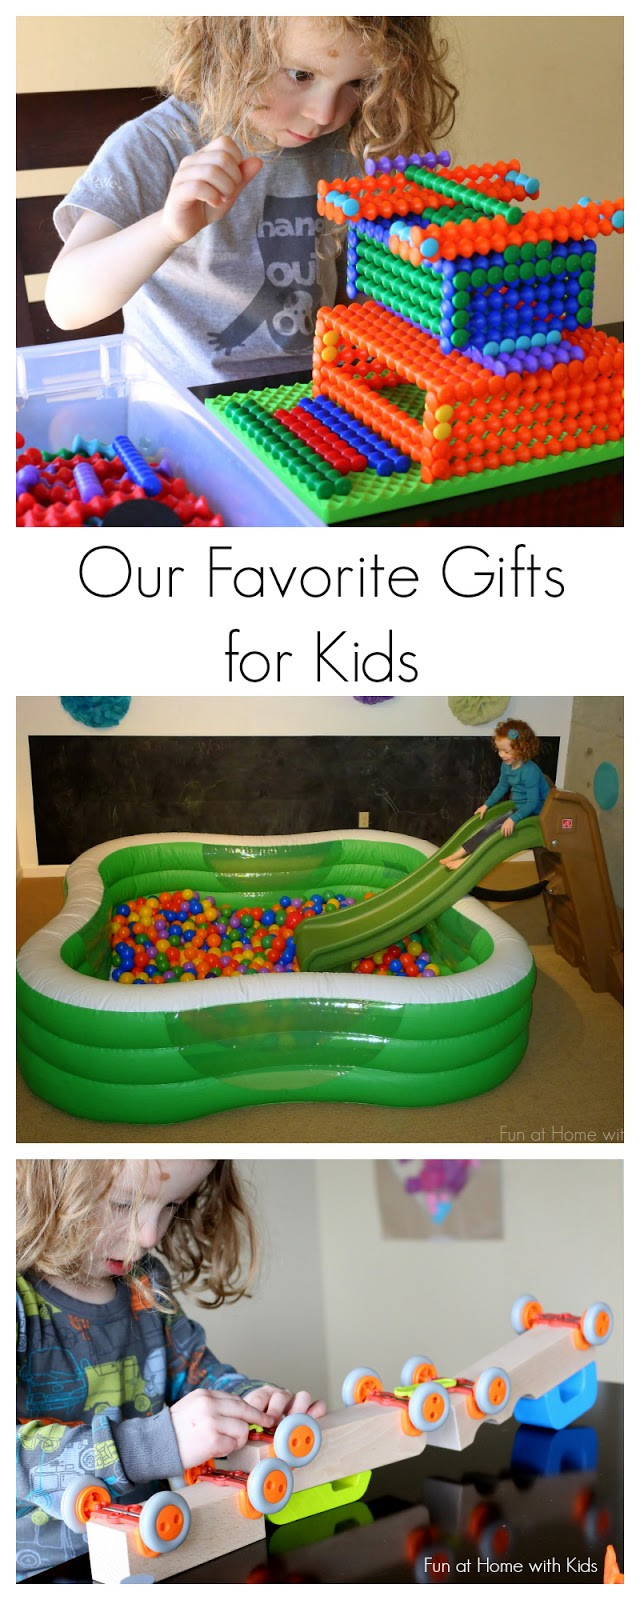 Top 10 Gifts For Kids
 Our 10 Best and Favorite Gift Ideas for Kids